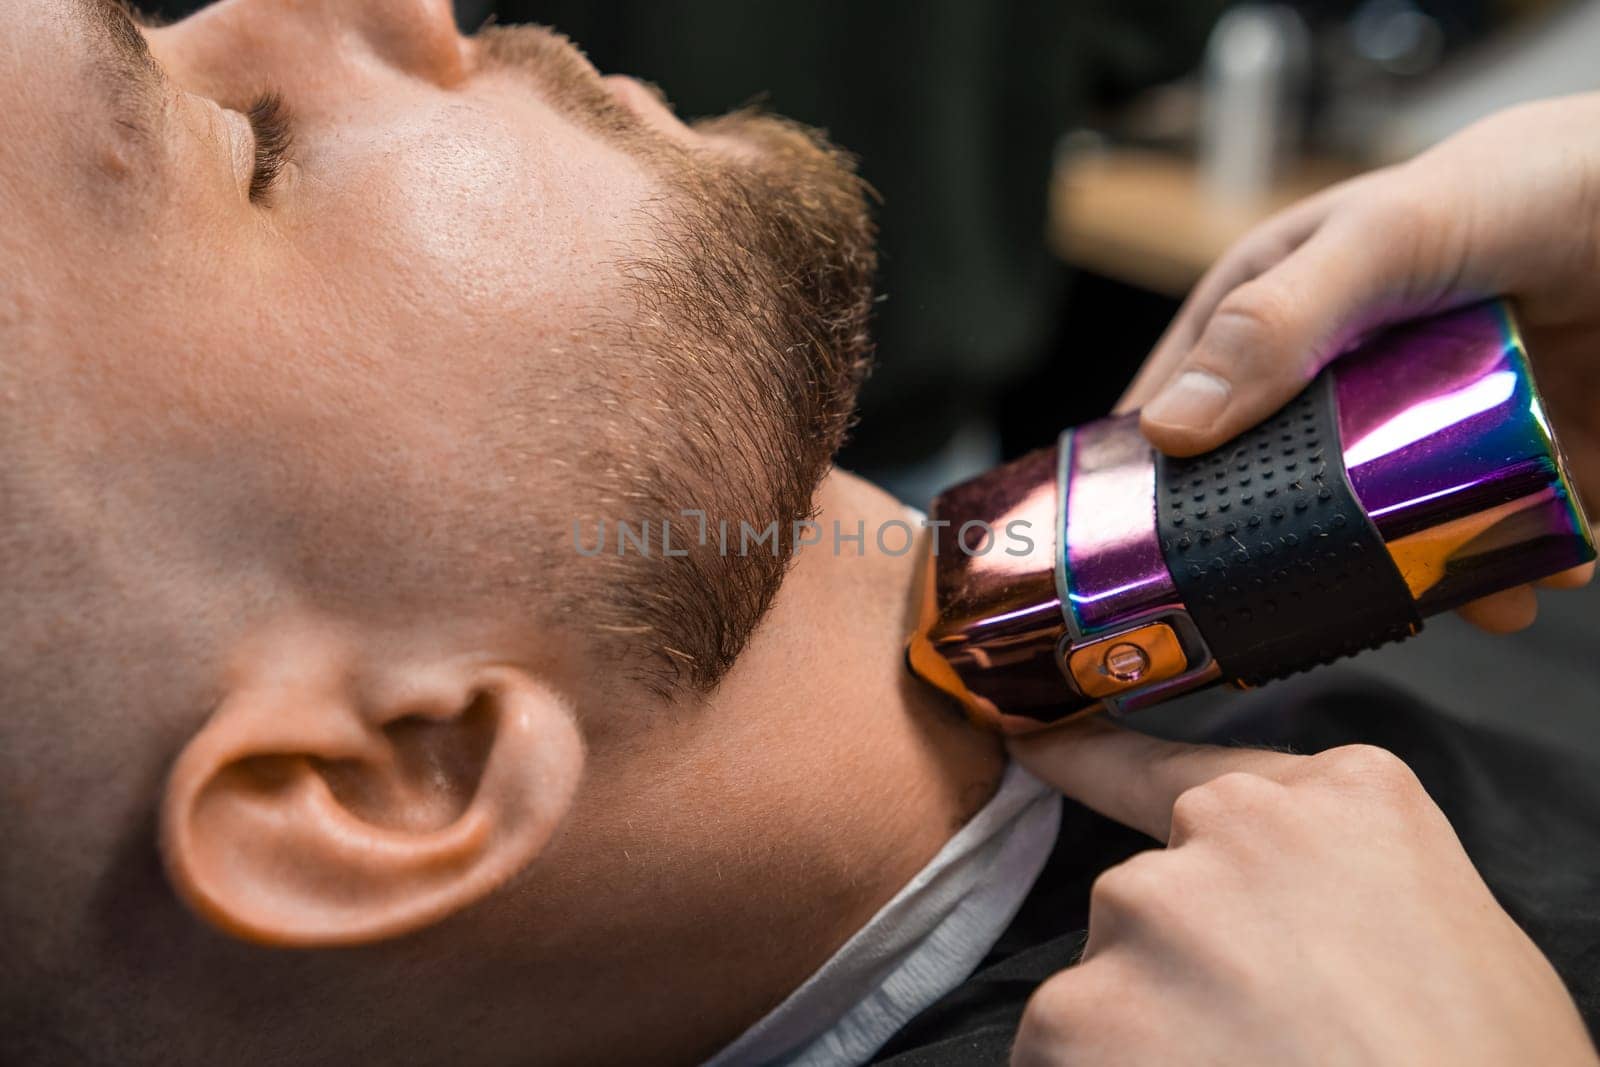 Master barber employs an automatic trimmer to groom the clients beard at the barbershop.